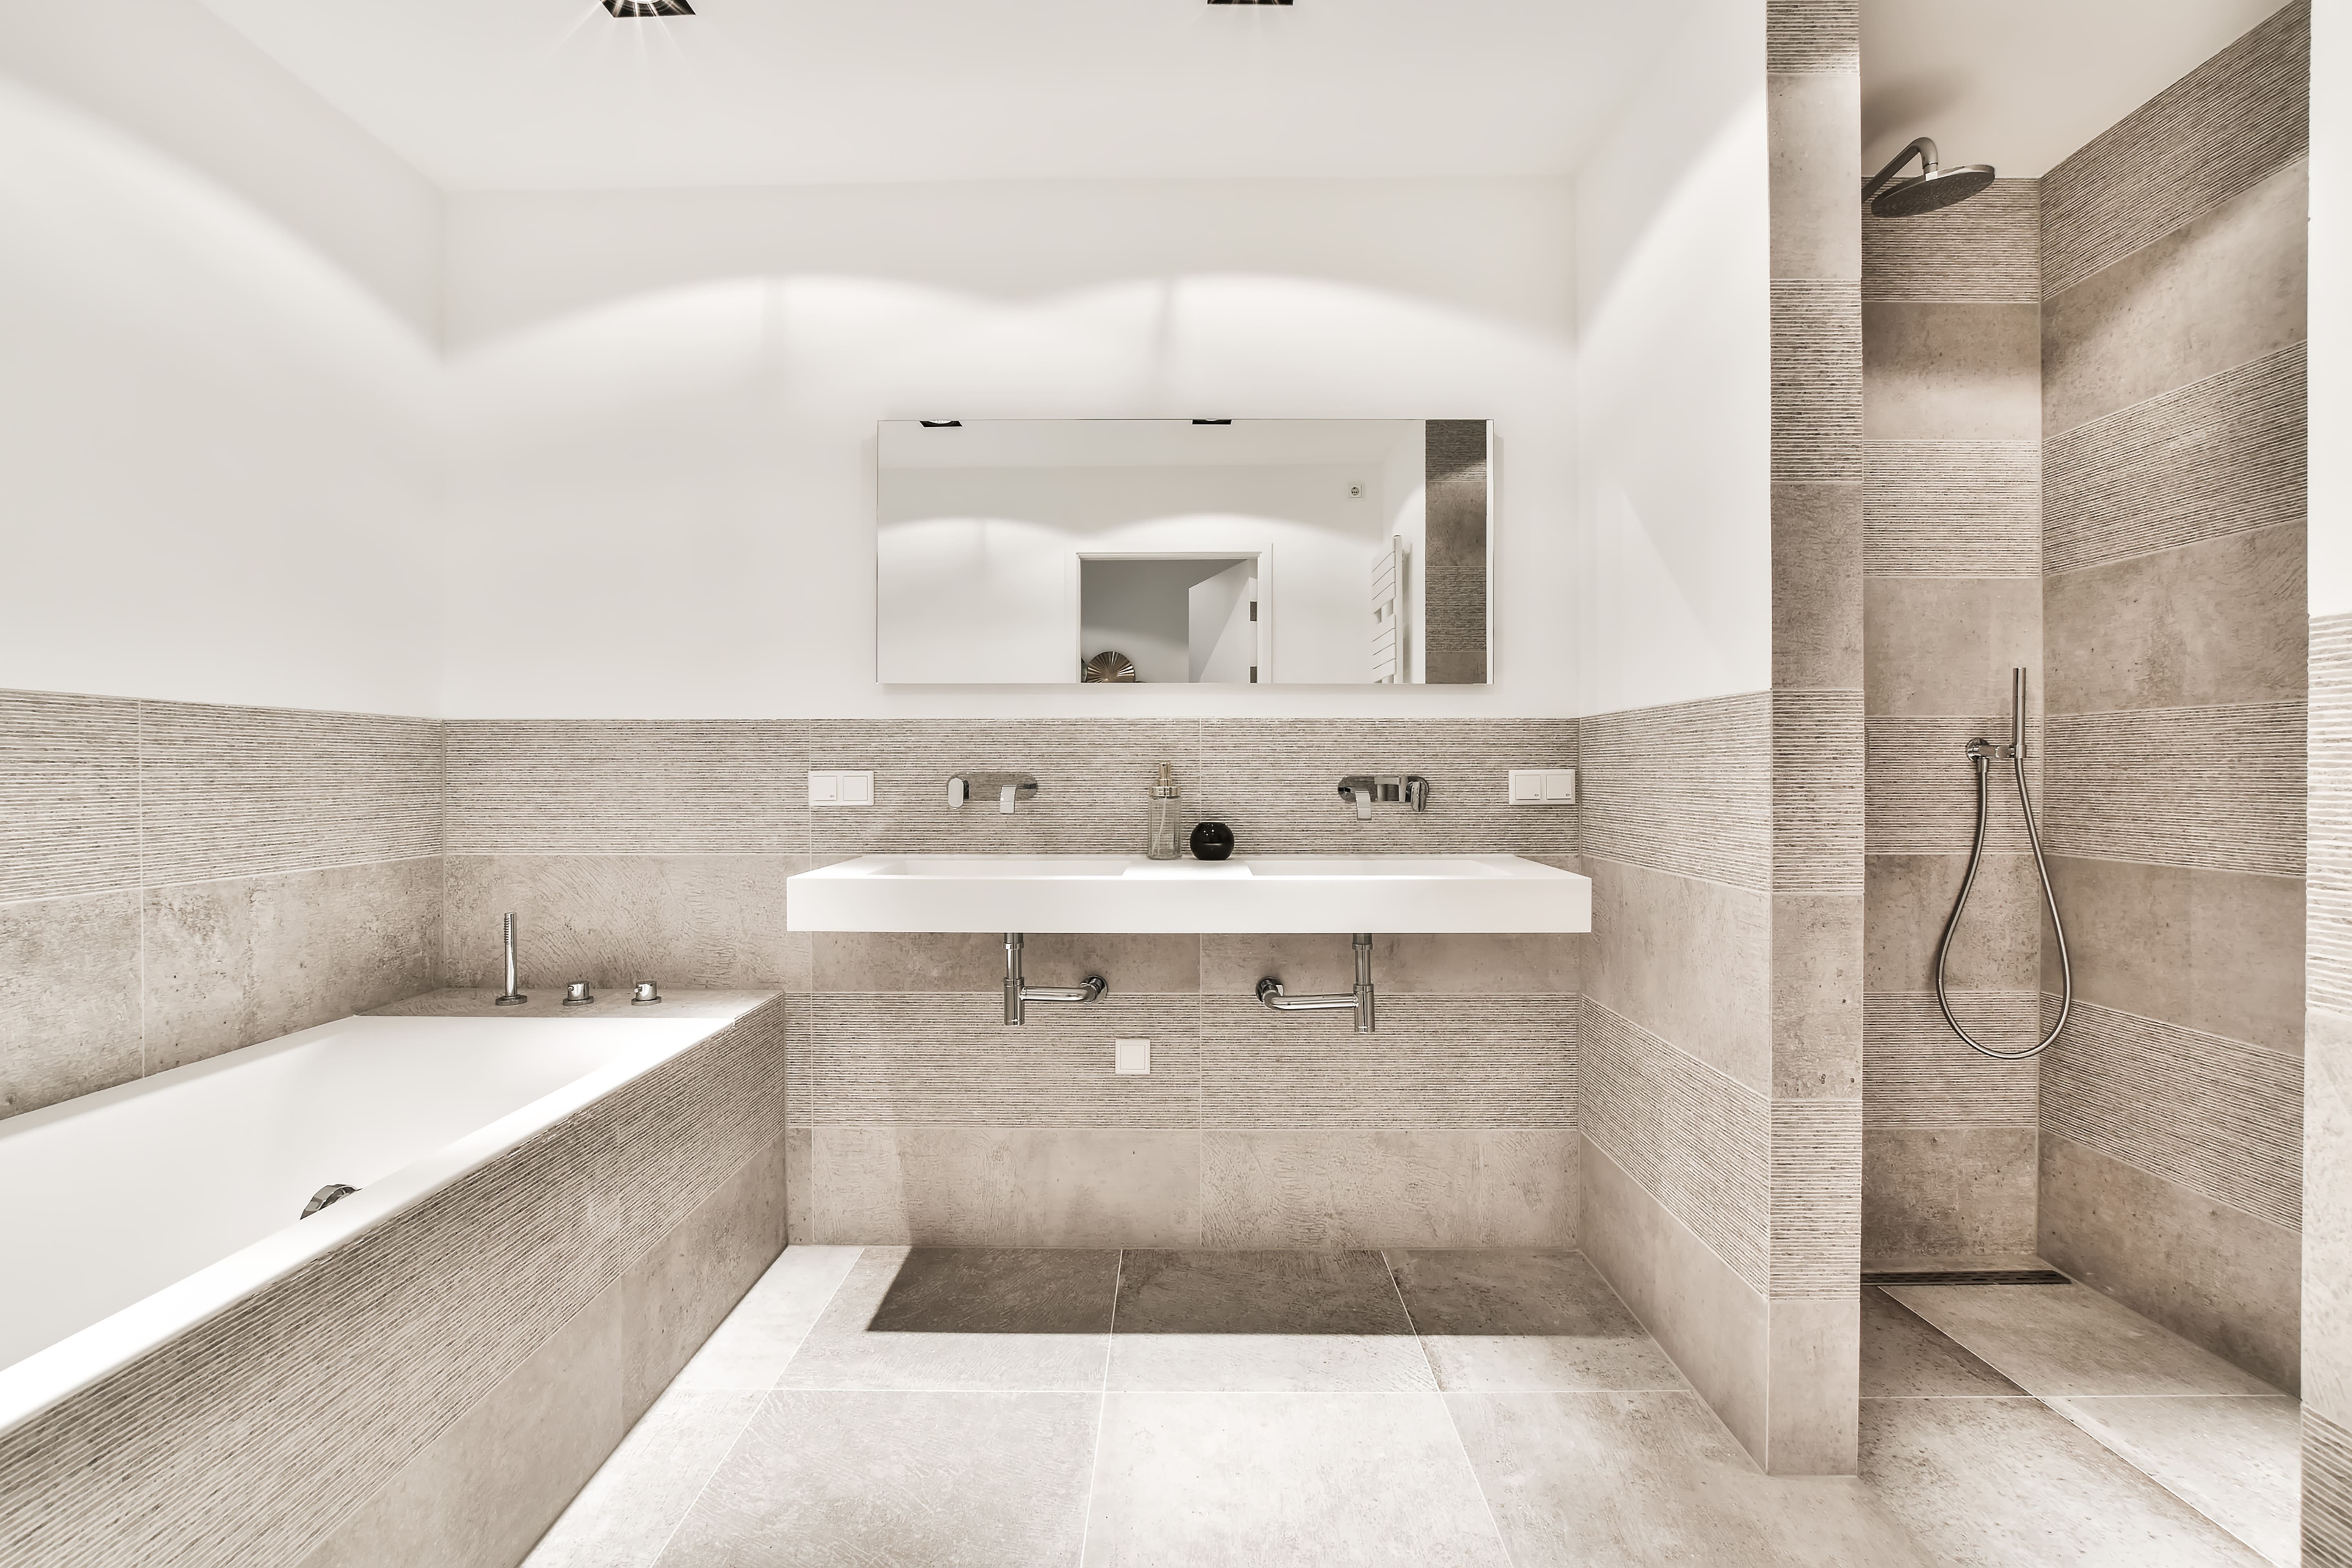 Bathroom Remodeling Services - Royal Construction